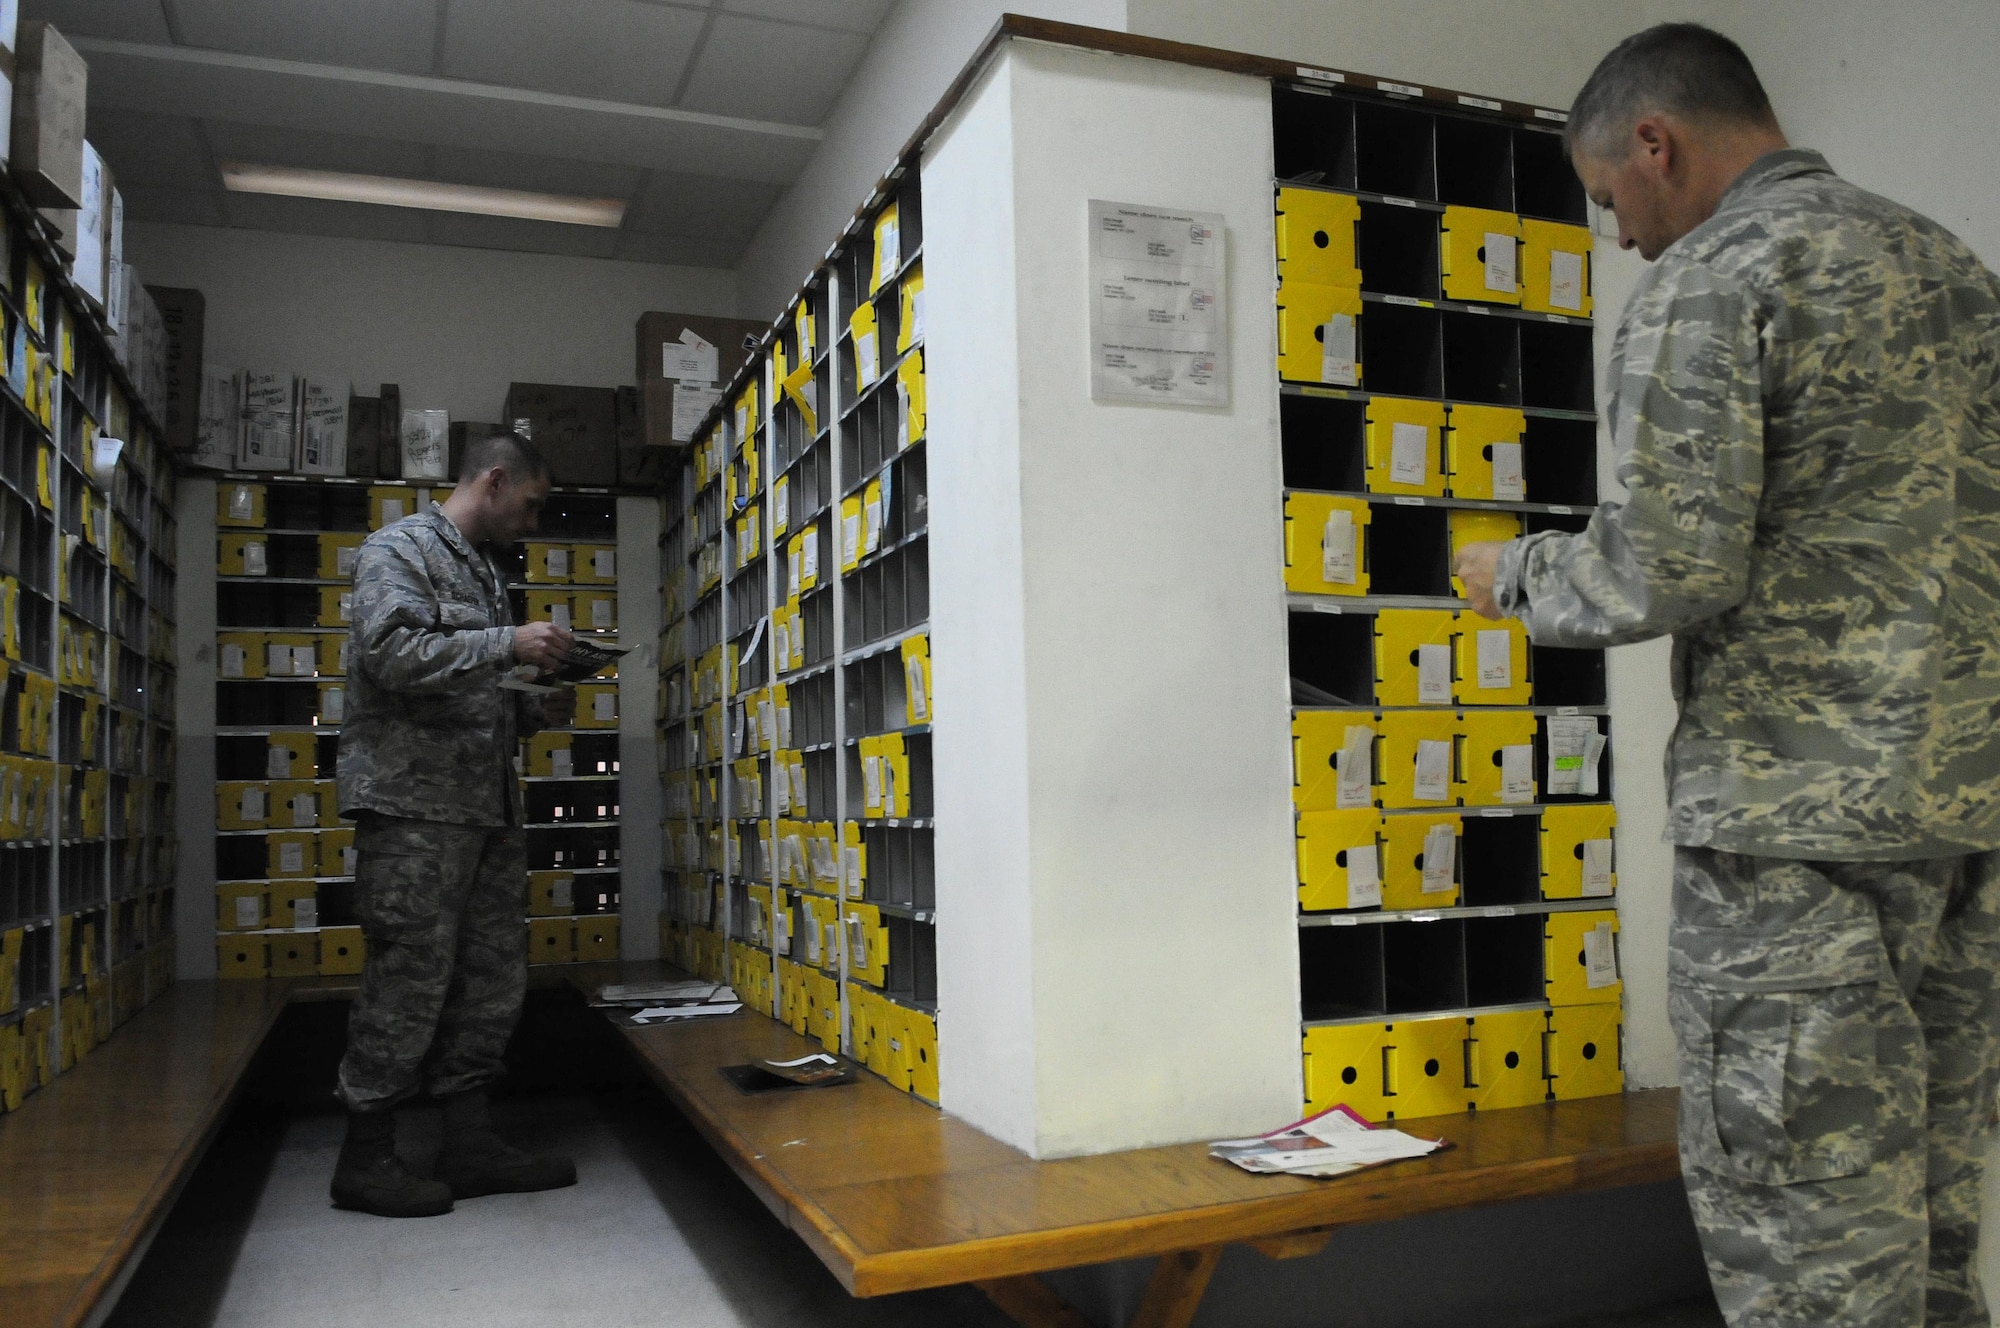 Col. Anthony Butts, 39th Air Base Wing vice commander, and Maj. Joseph Schaefer, 39th Comptroller Squadron commander, separate mail Oct. 13, 2010 at Incirlik Air Base, Turkey.  The ODC processes approximately 900 packages each week and is often supported by volunteer assistance.  (U.S. Air Force photo by Senior Airman Ashley Wood/Released)